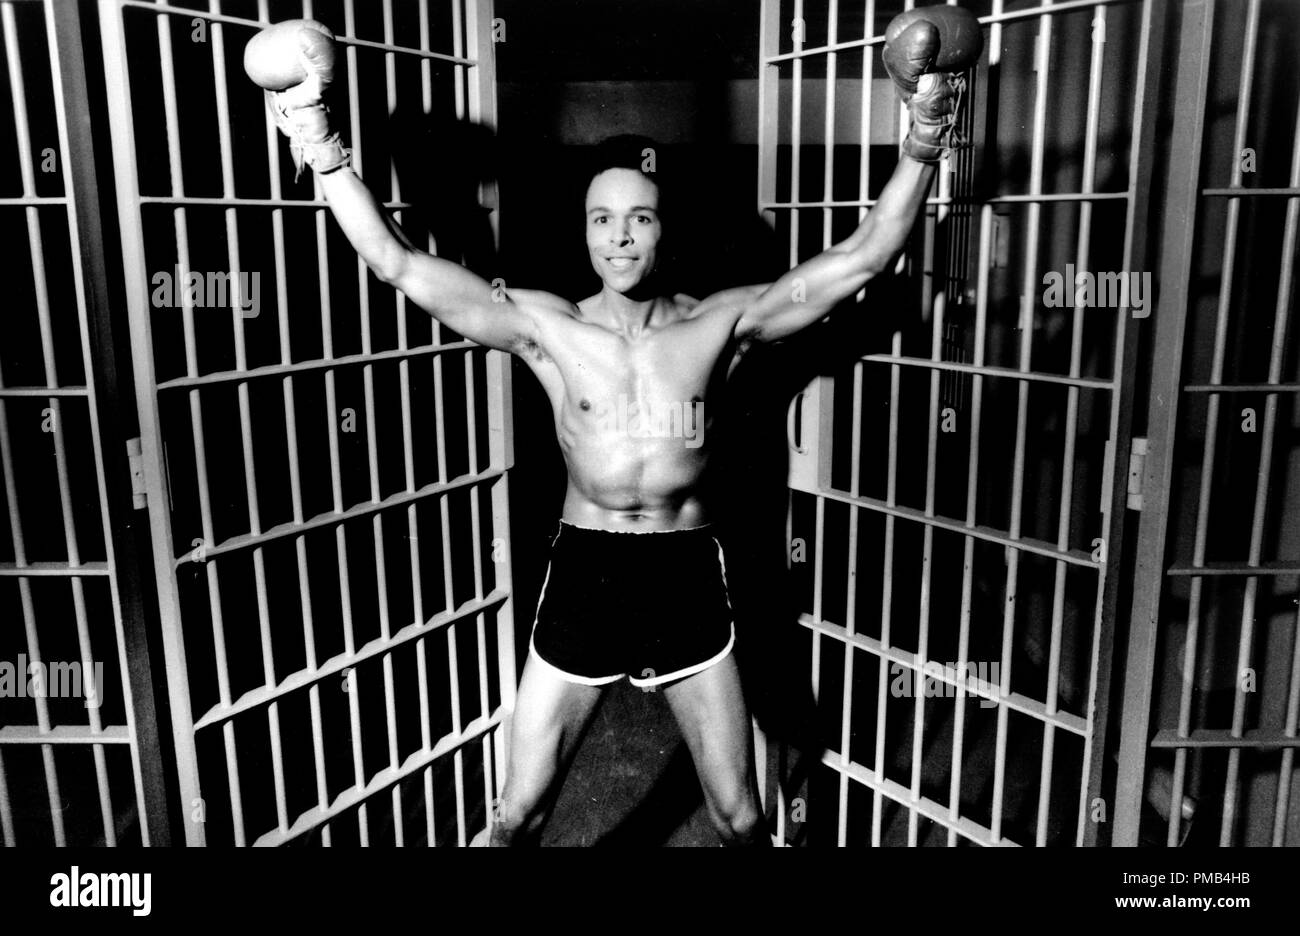 Leon Isaac Kennedy, 'Penitentiary' (1979 The Jerry Gross Organization File Reference # 33371 194THA Stock Photo